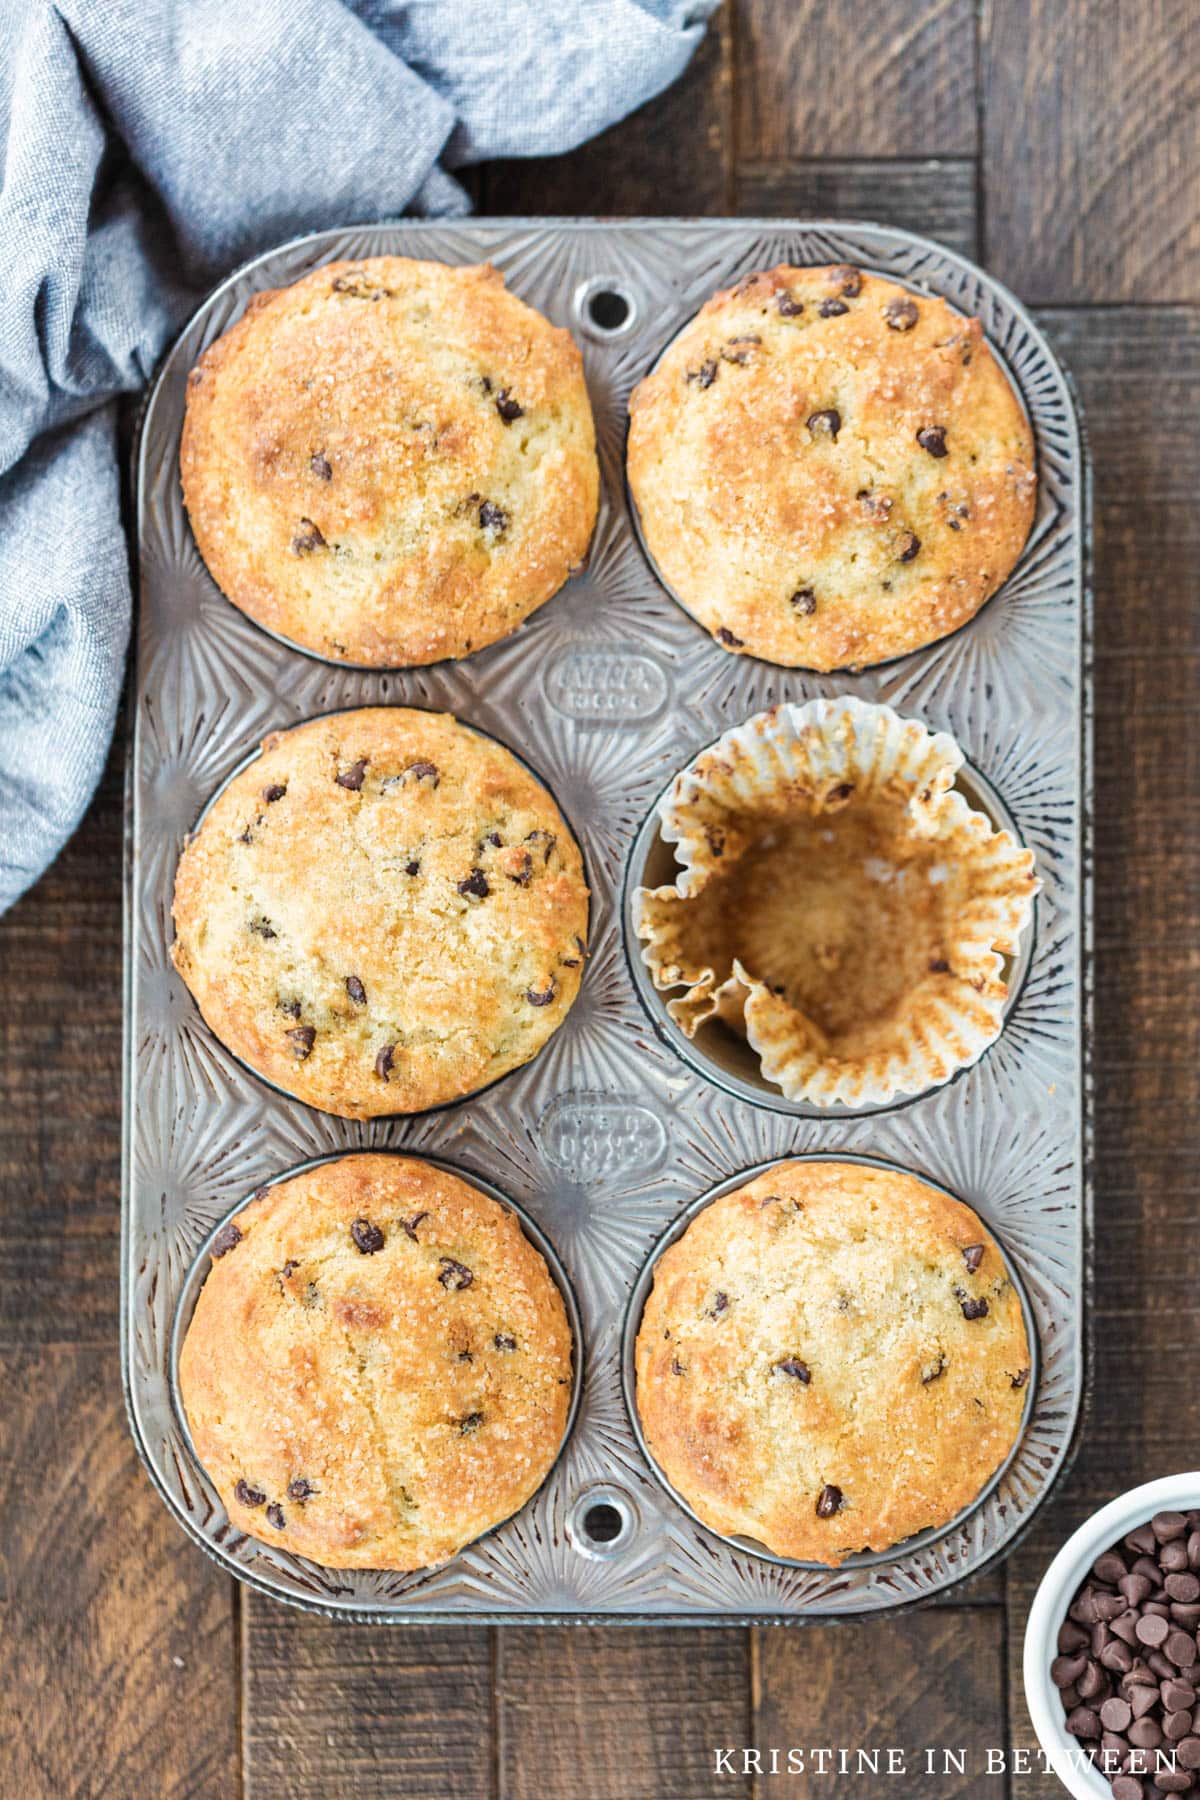 Muffins in a muffin tin with one missing and a light blue napkin sitting next to them.